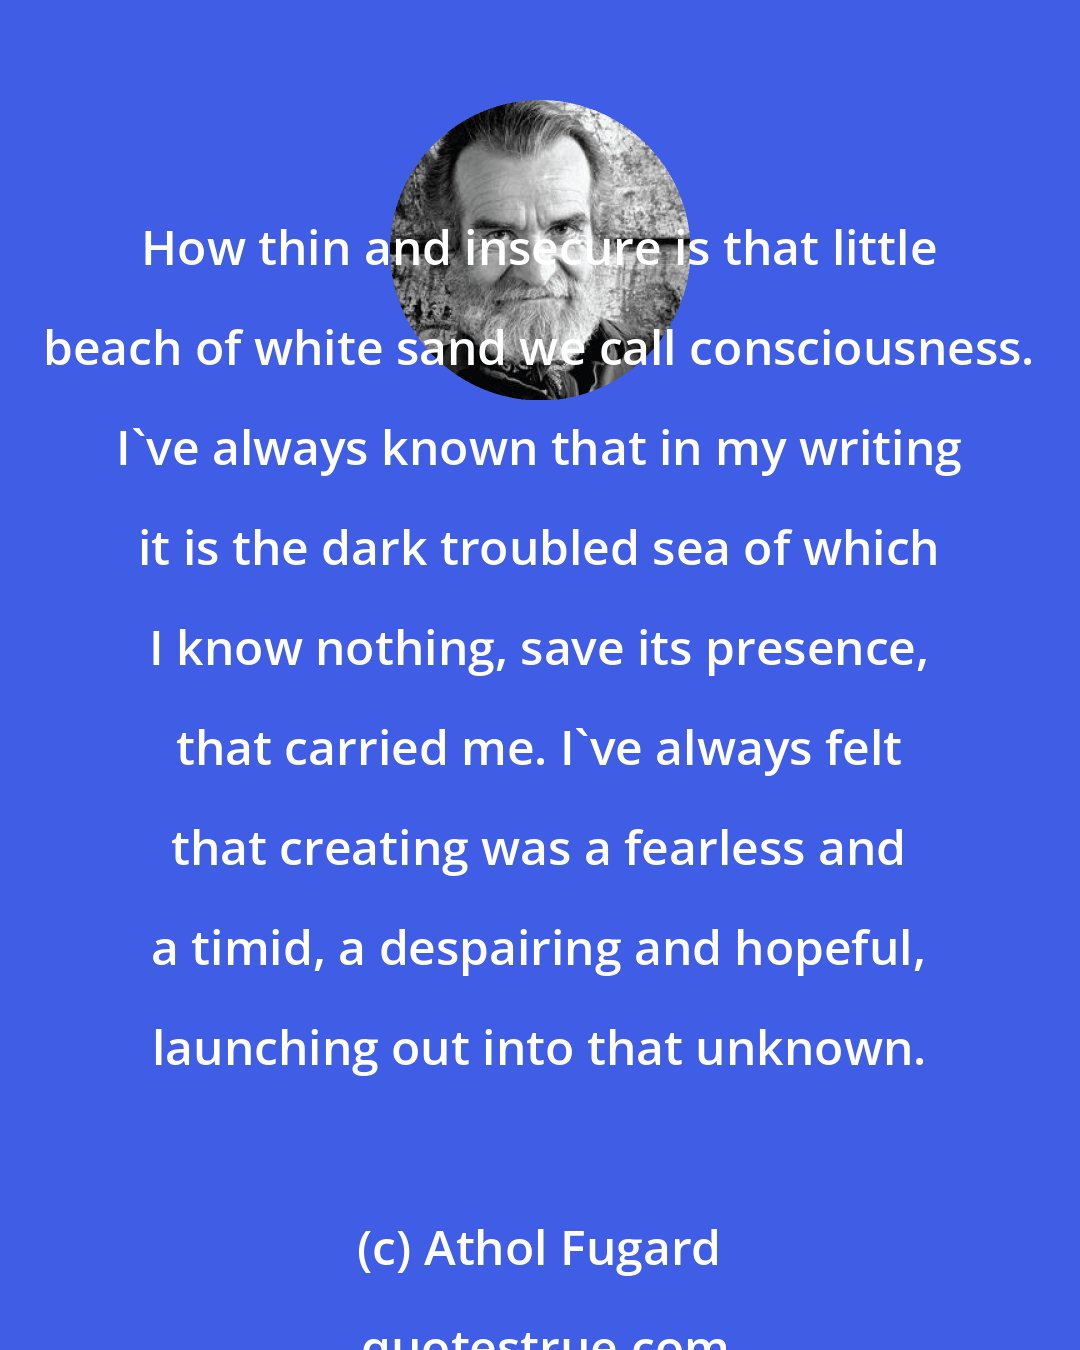 Athol Fugard: How thin and insecure is that little beach of white sand we call consciousness. I've always known that in my writing it is the dark troubled sea of which I know nothing, save its presence, that carried me. I've always felt that creating was a fearless and a timid, a despairing and hopeful, launching out into that unknown.